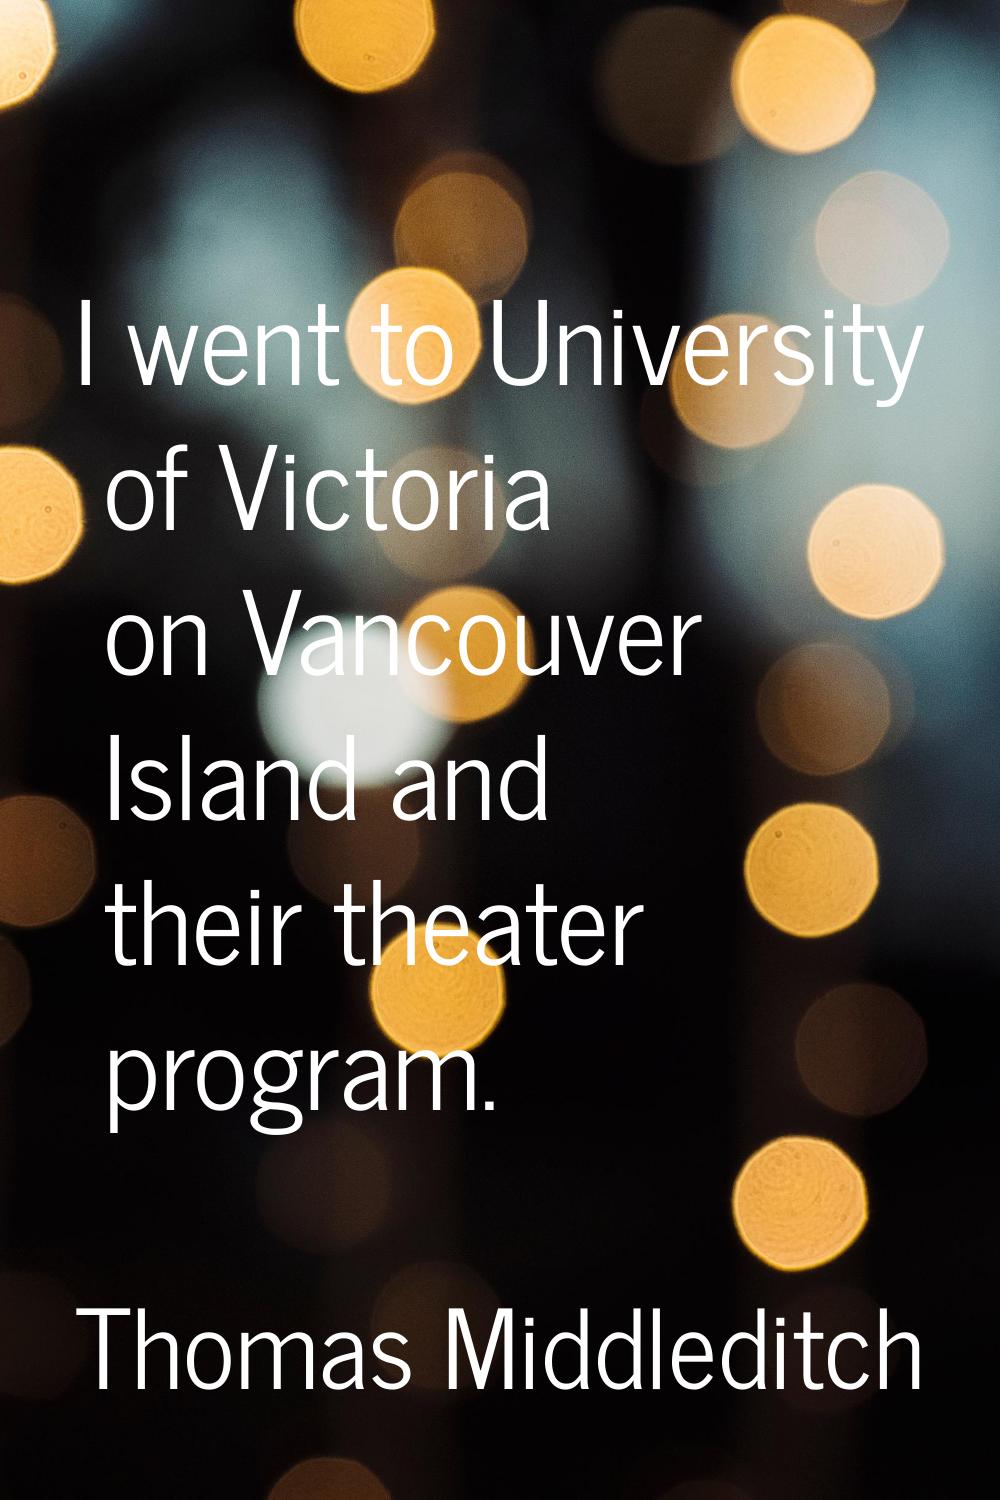 I went to University of Victoria on Vancouver Island and their theater program.